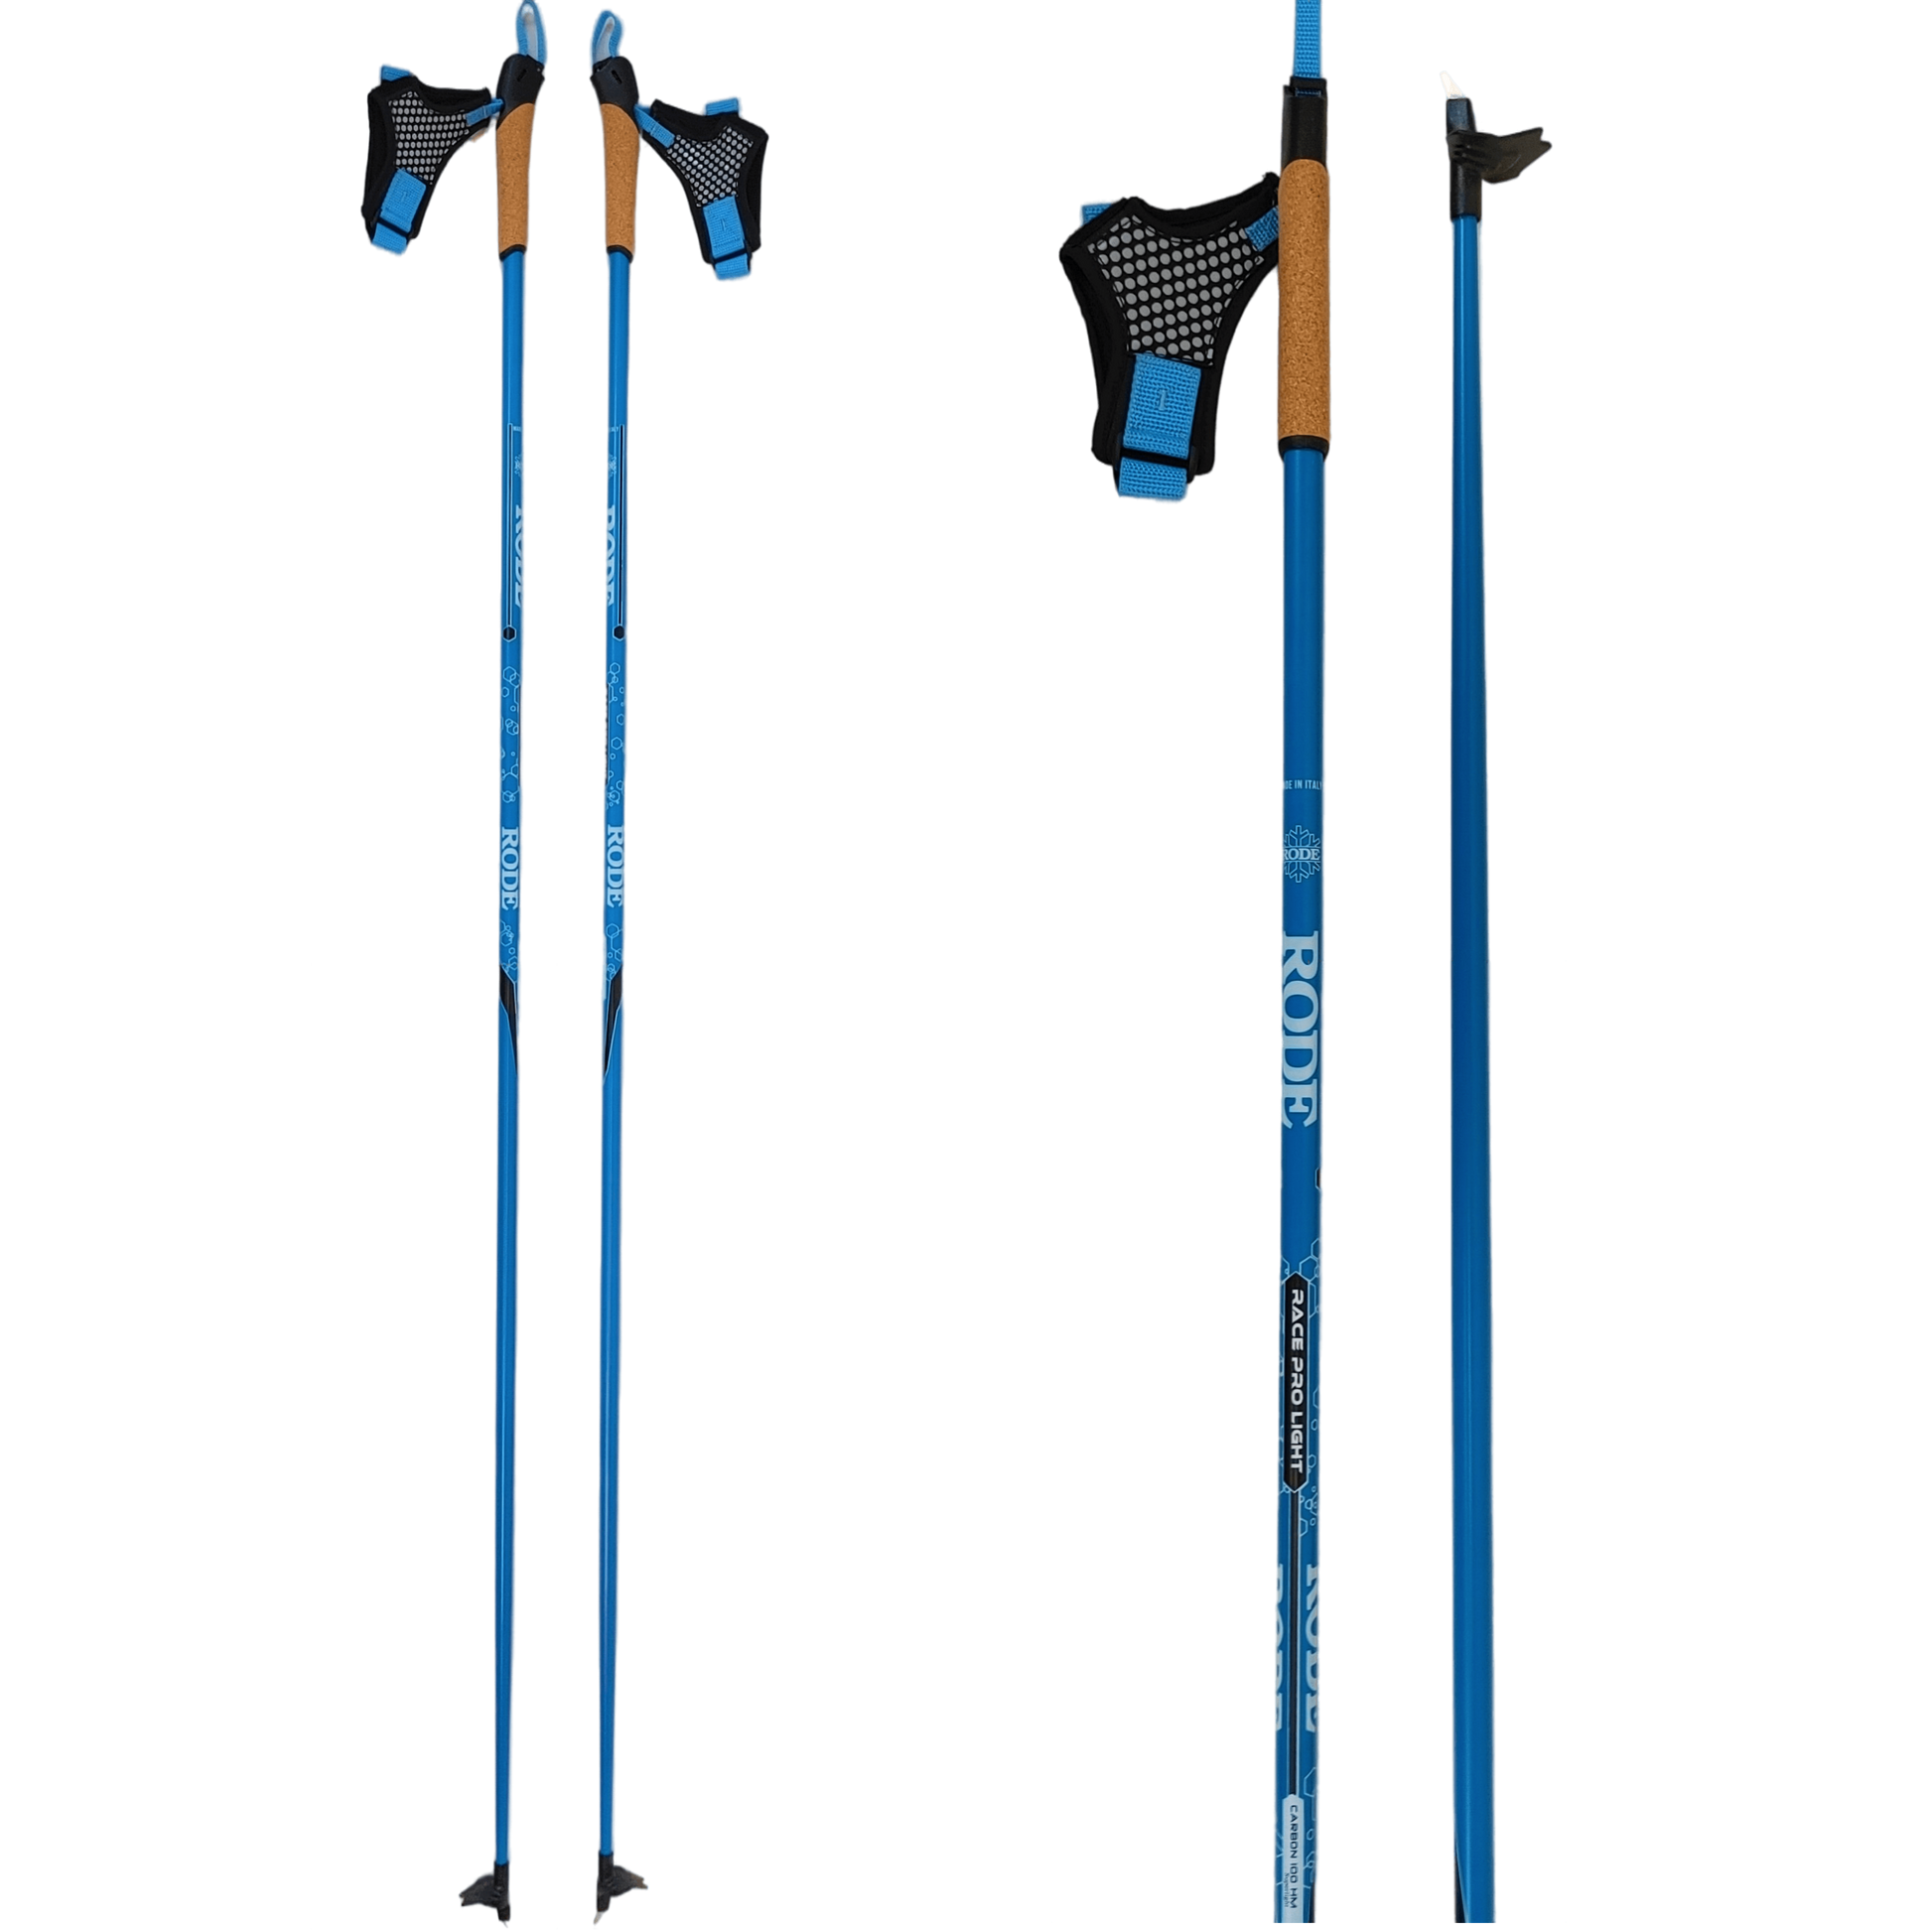 A product picture of the Rode Race Pro Light Poles